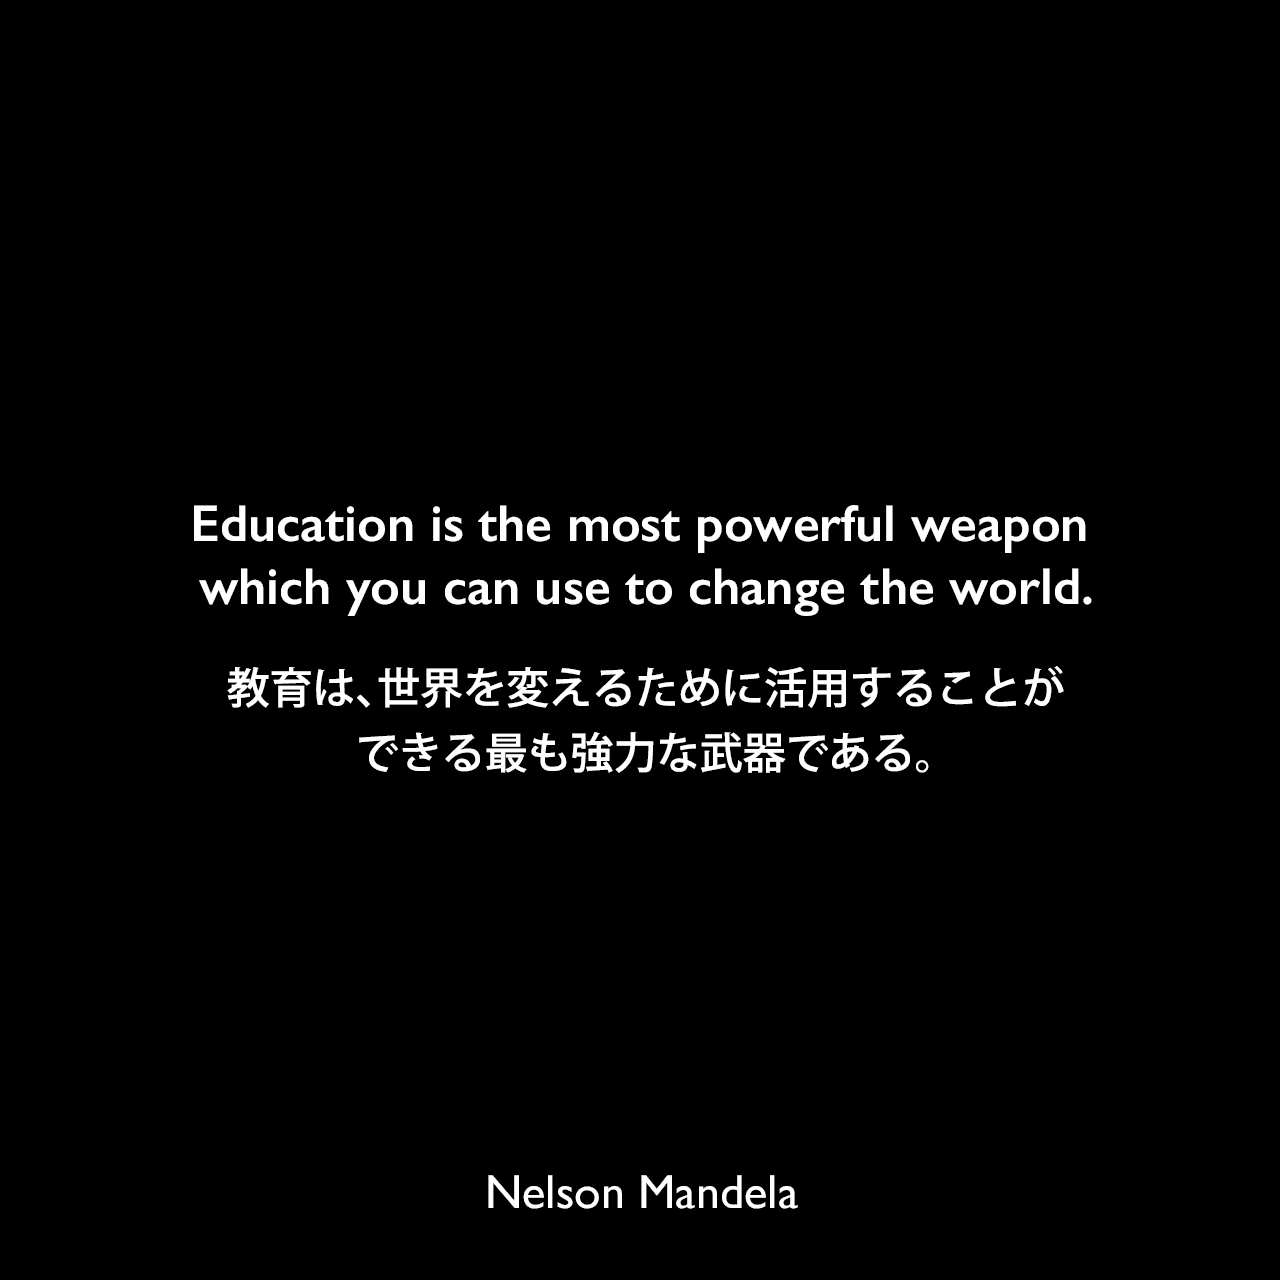 Education is the most powerful weapon which you can use to change the world.教育は、世界を変えるために活用することができる最も強力な武器である。- テレビ番組での演説よりNelson Mandela